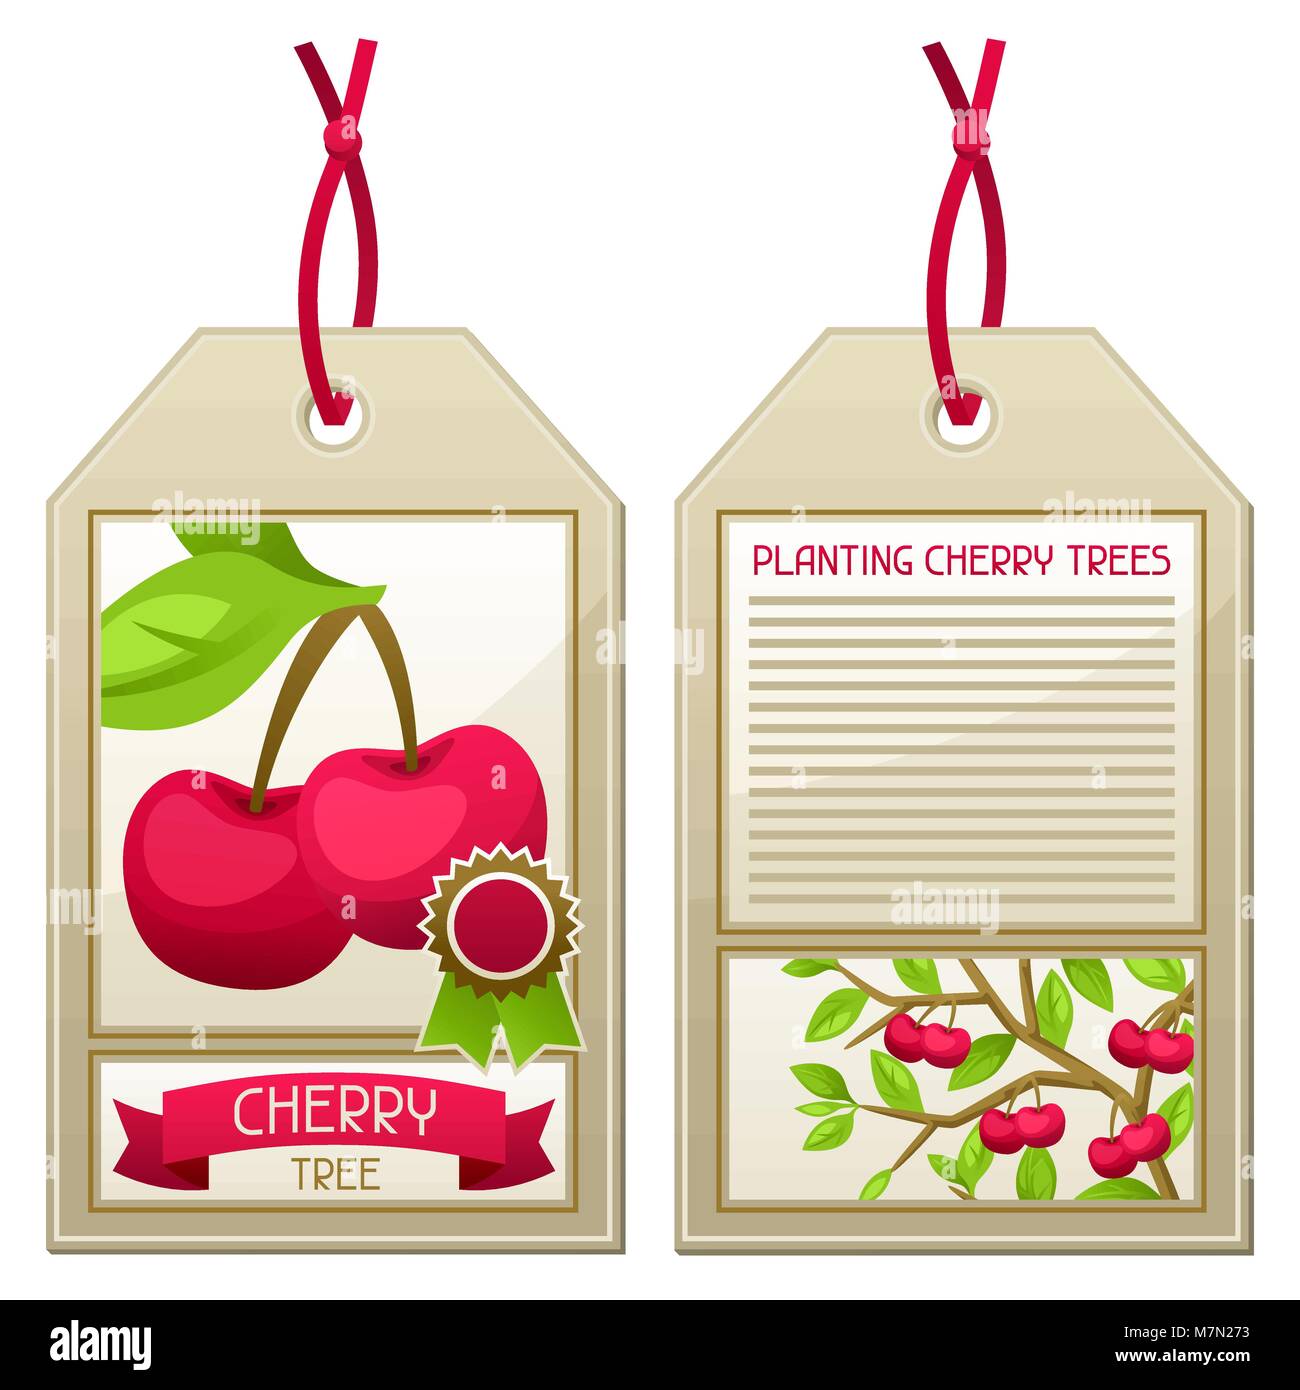 Sale tag of seedlings cherry trees. Instructions for planting tree Stock Vector